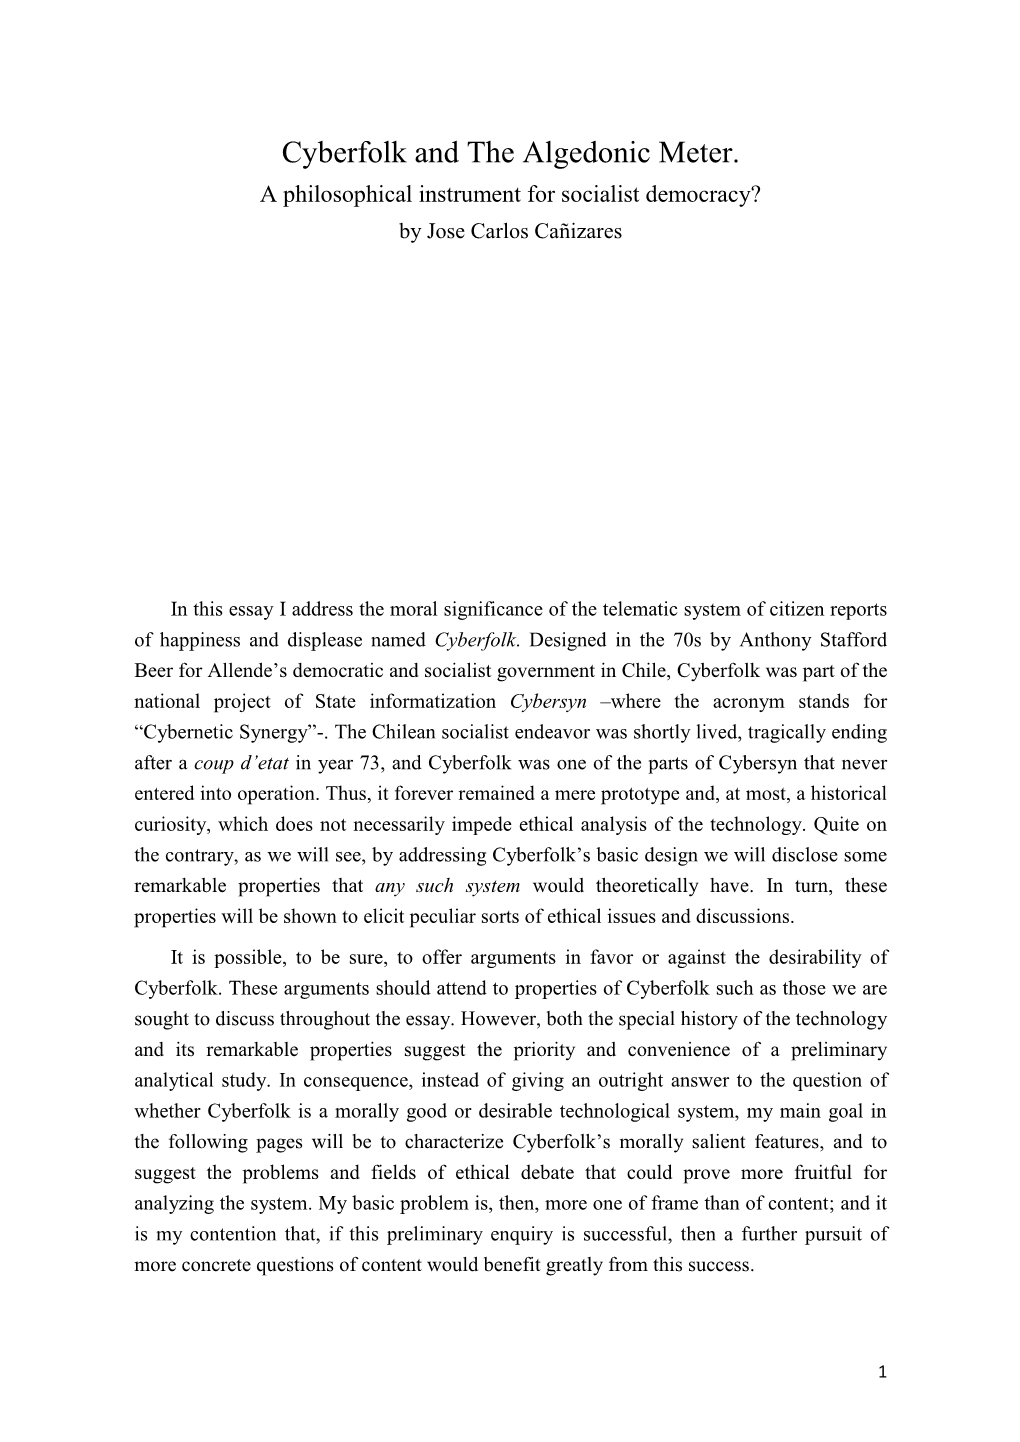 Cyberfolk and the Algedonic Meter. a Philosophical Instrument for Socialist Democracy? by Jose Carlos Cañizares